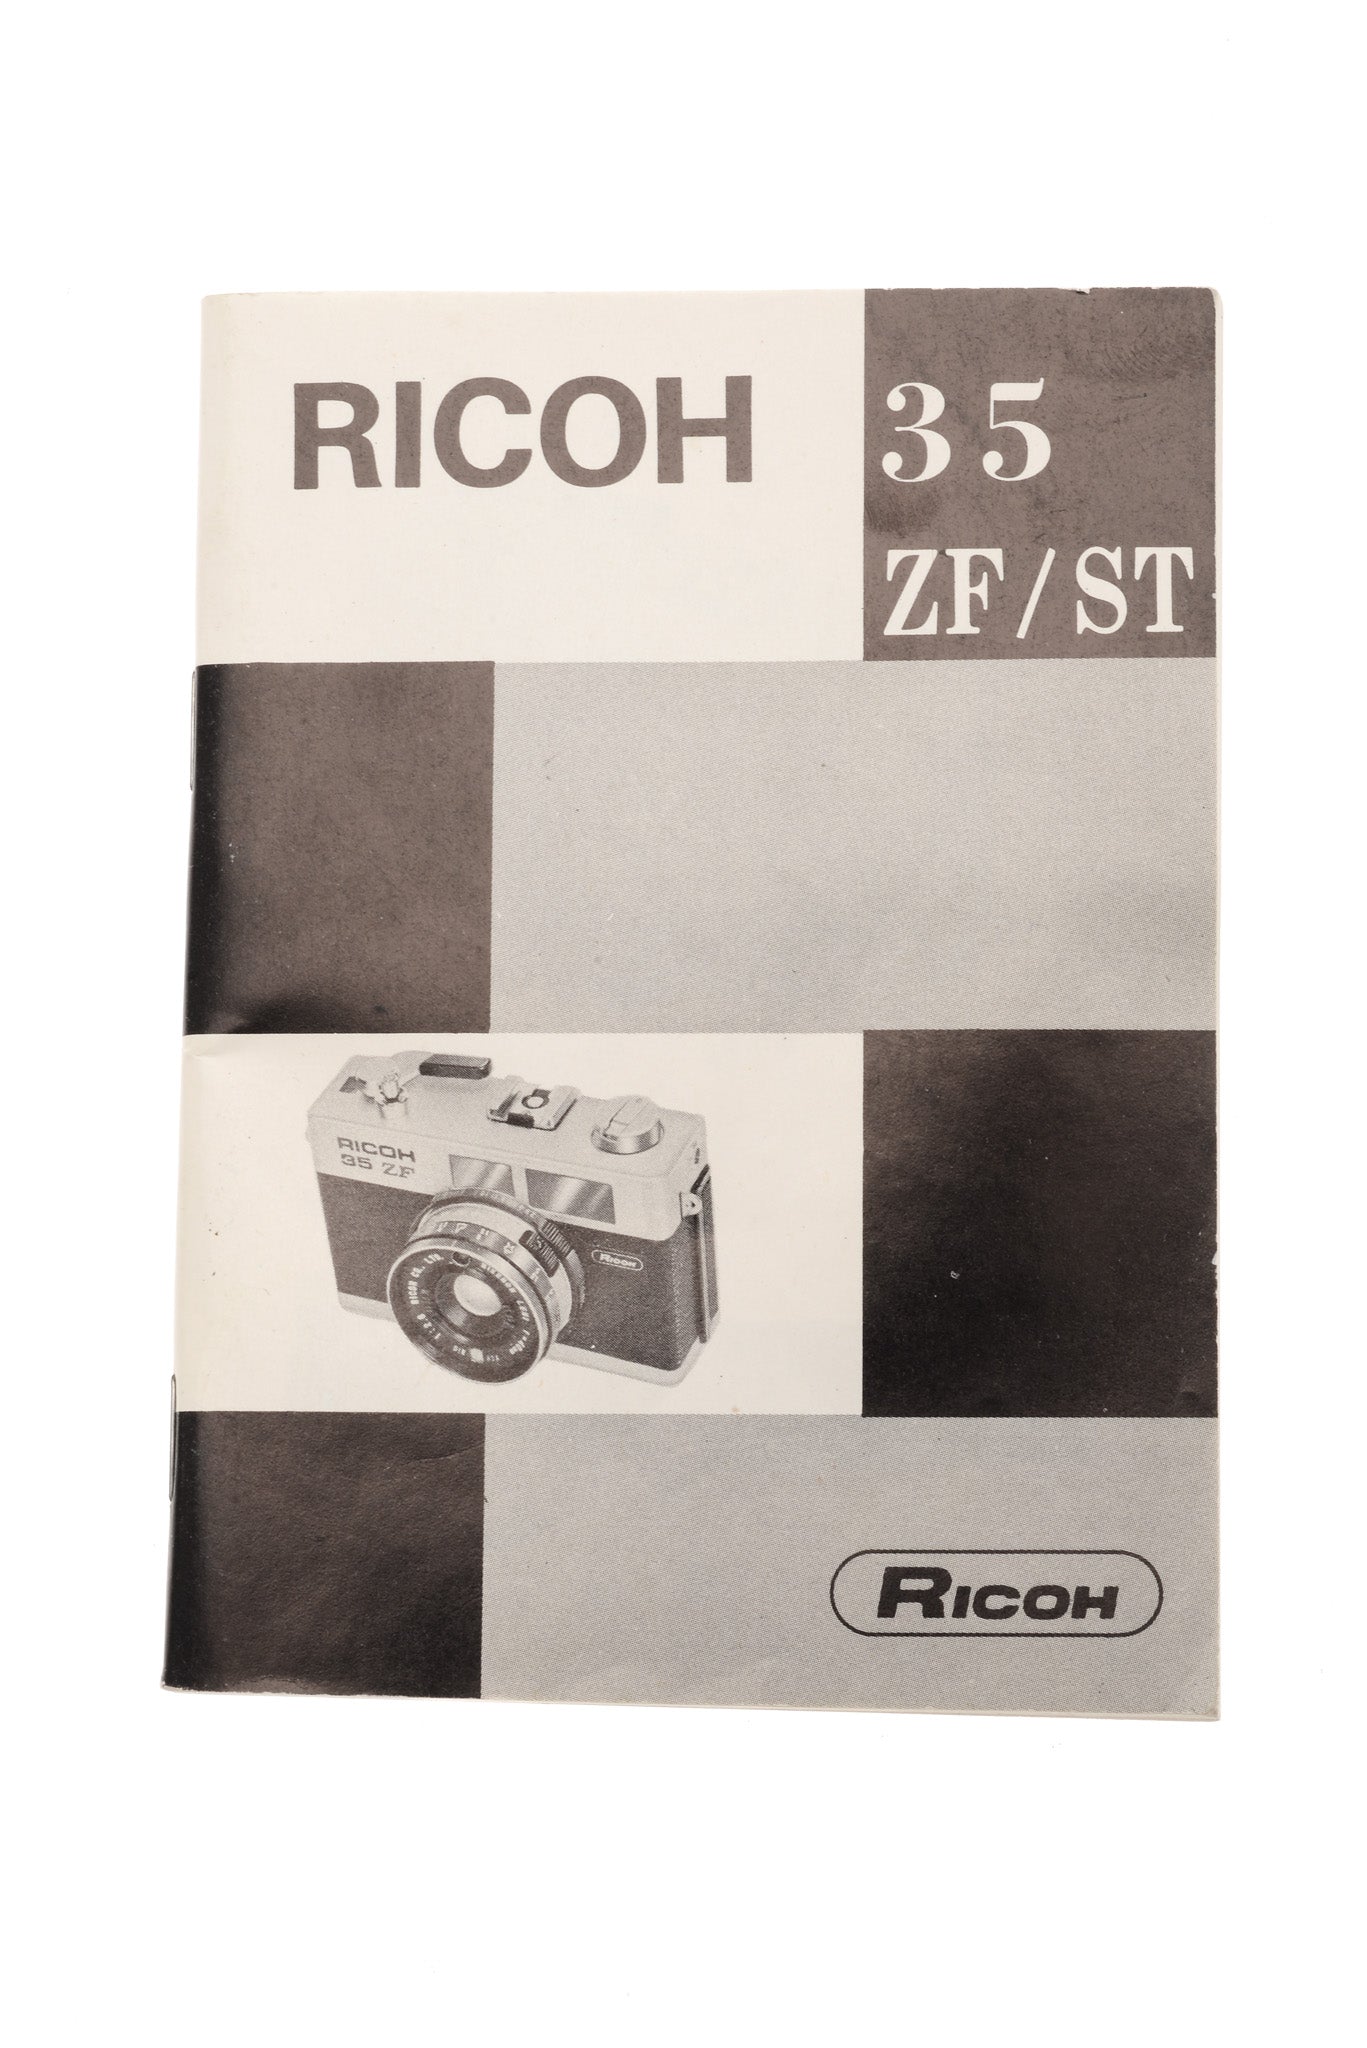 Ricoh 35 ZF/ST Instructions - Accessory